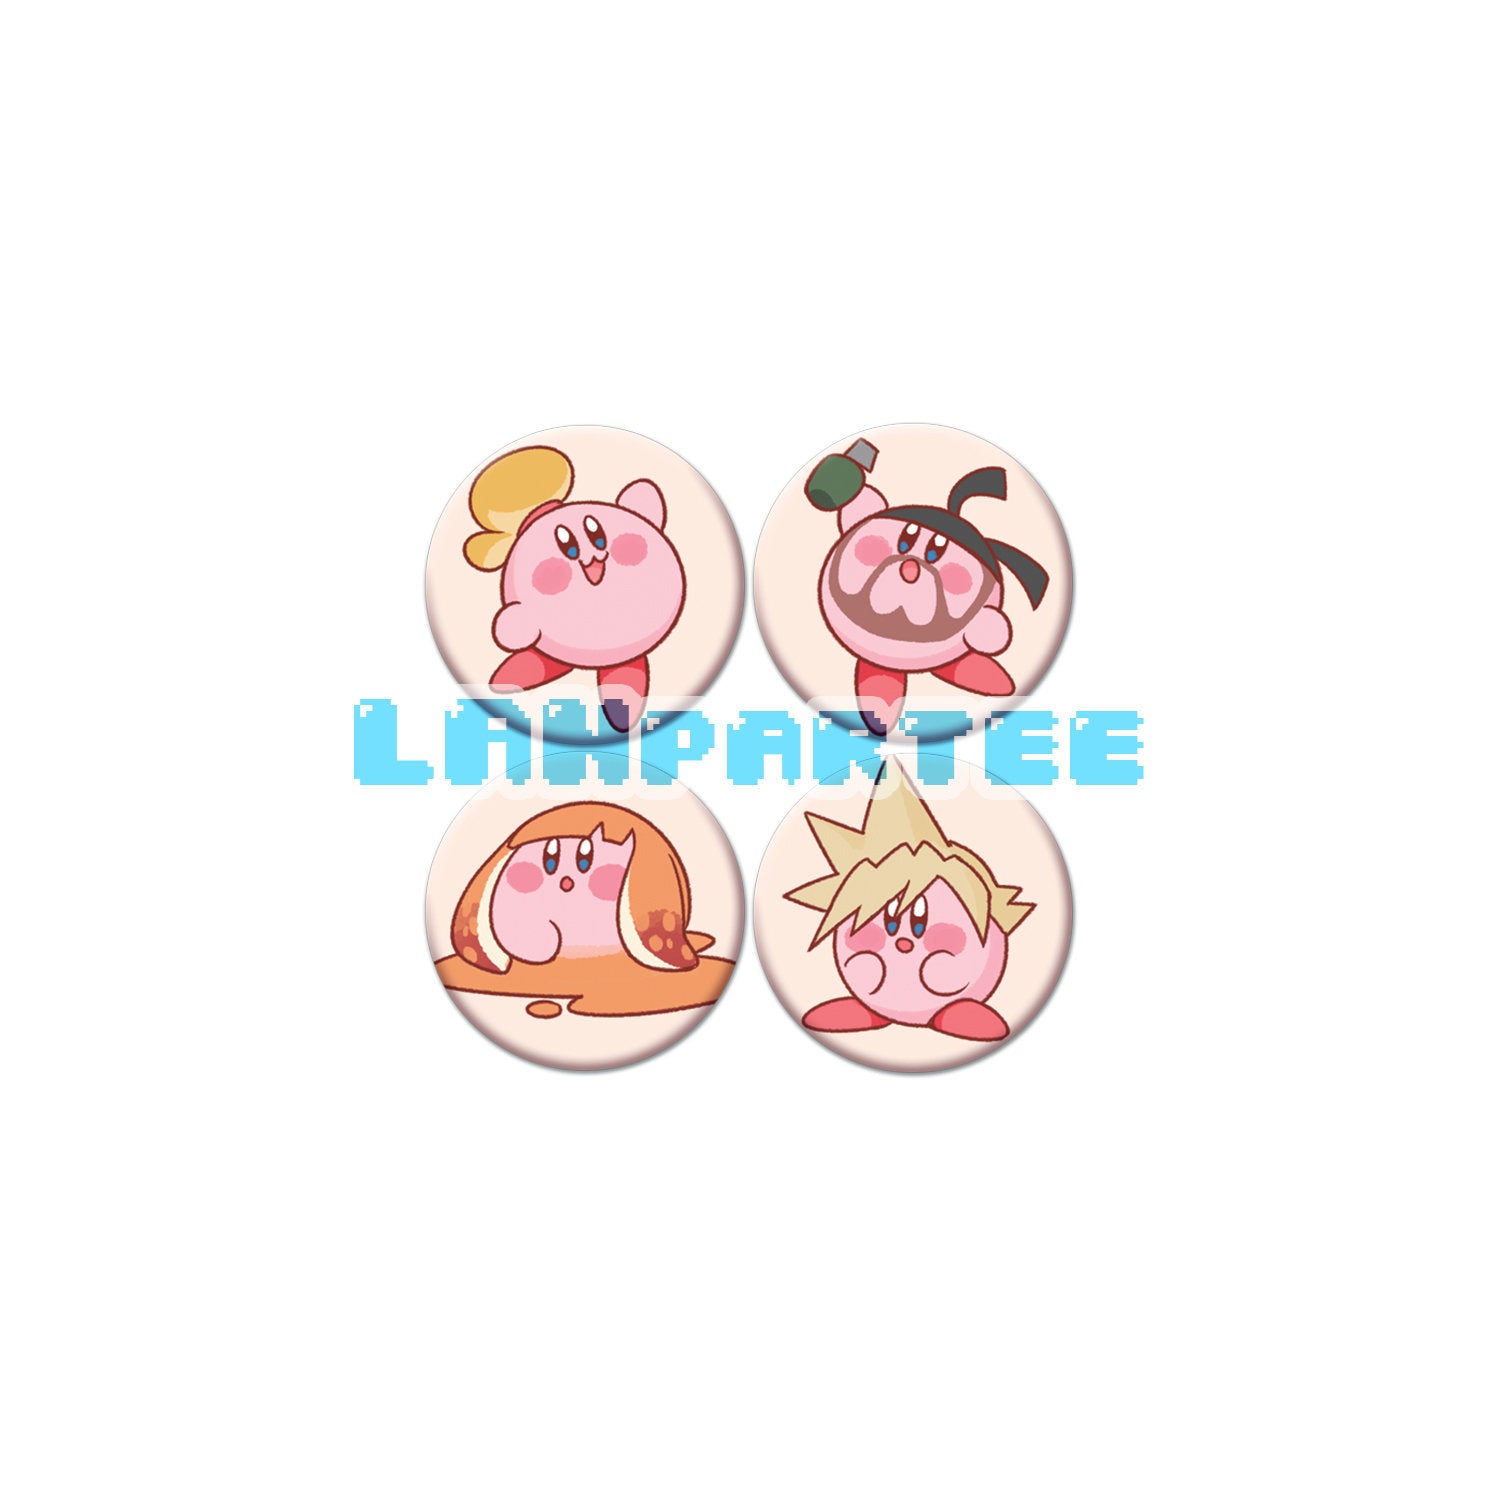 Super Smash Brothers Ultimate Kirby Buttons – LANpartee